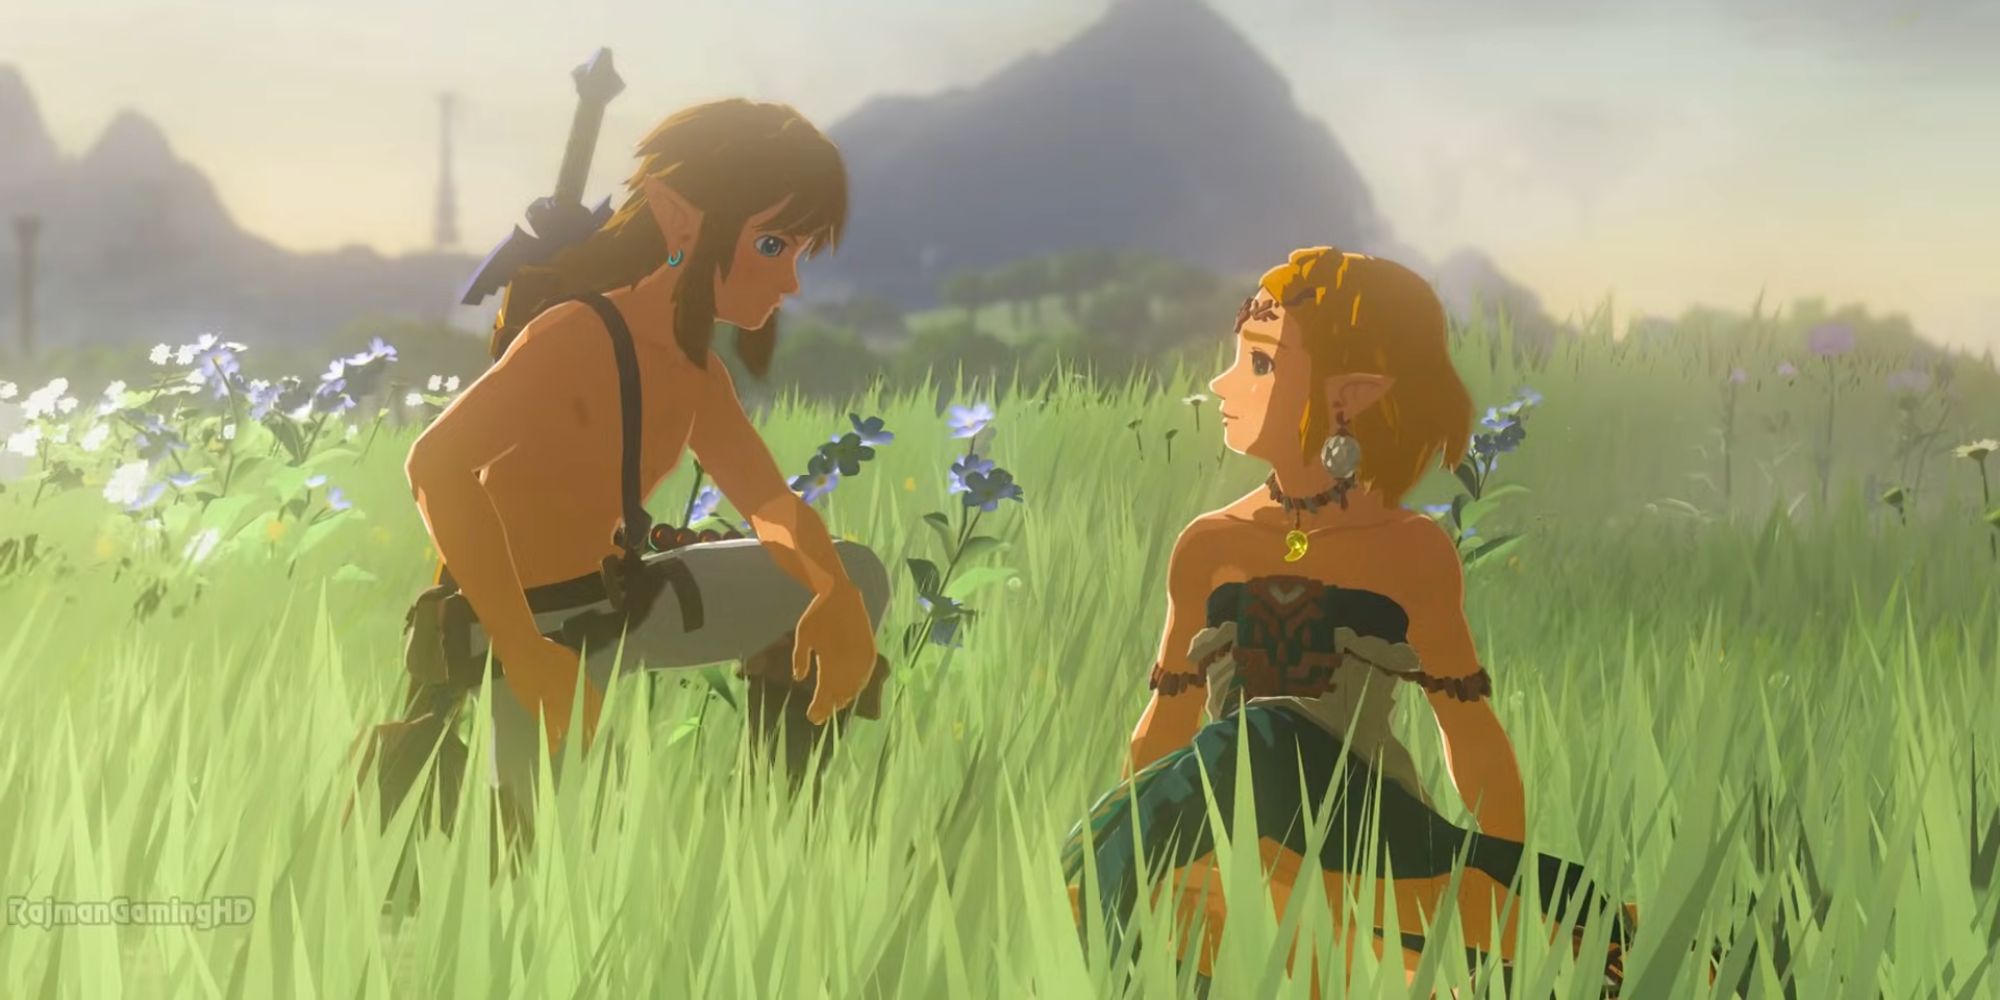 Link and Zelda meet again at the end of the game.